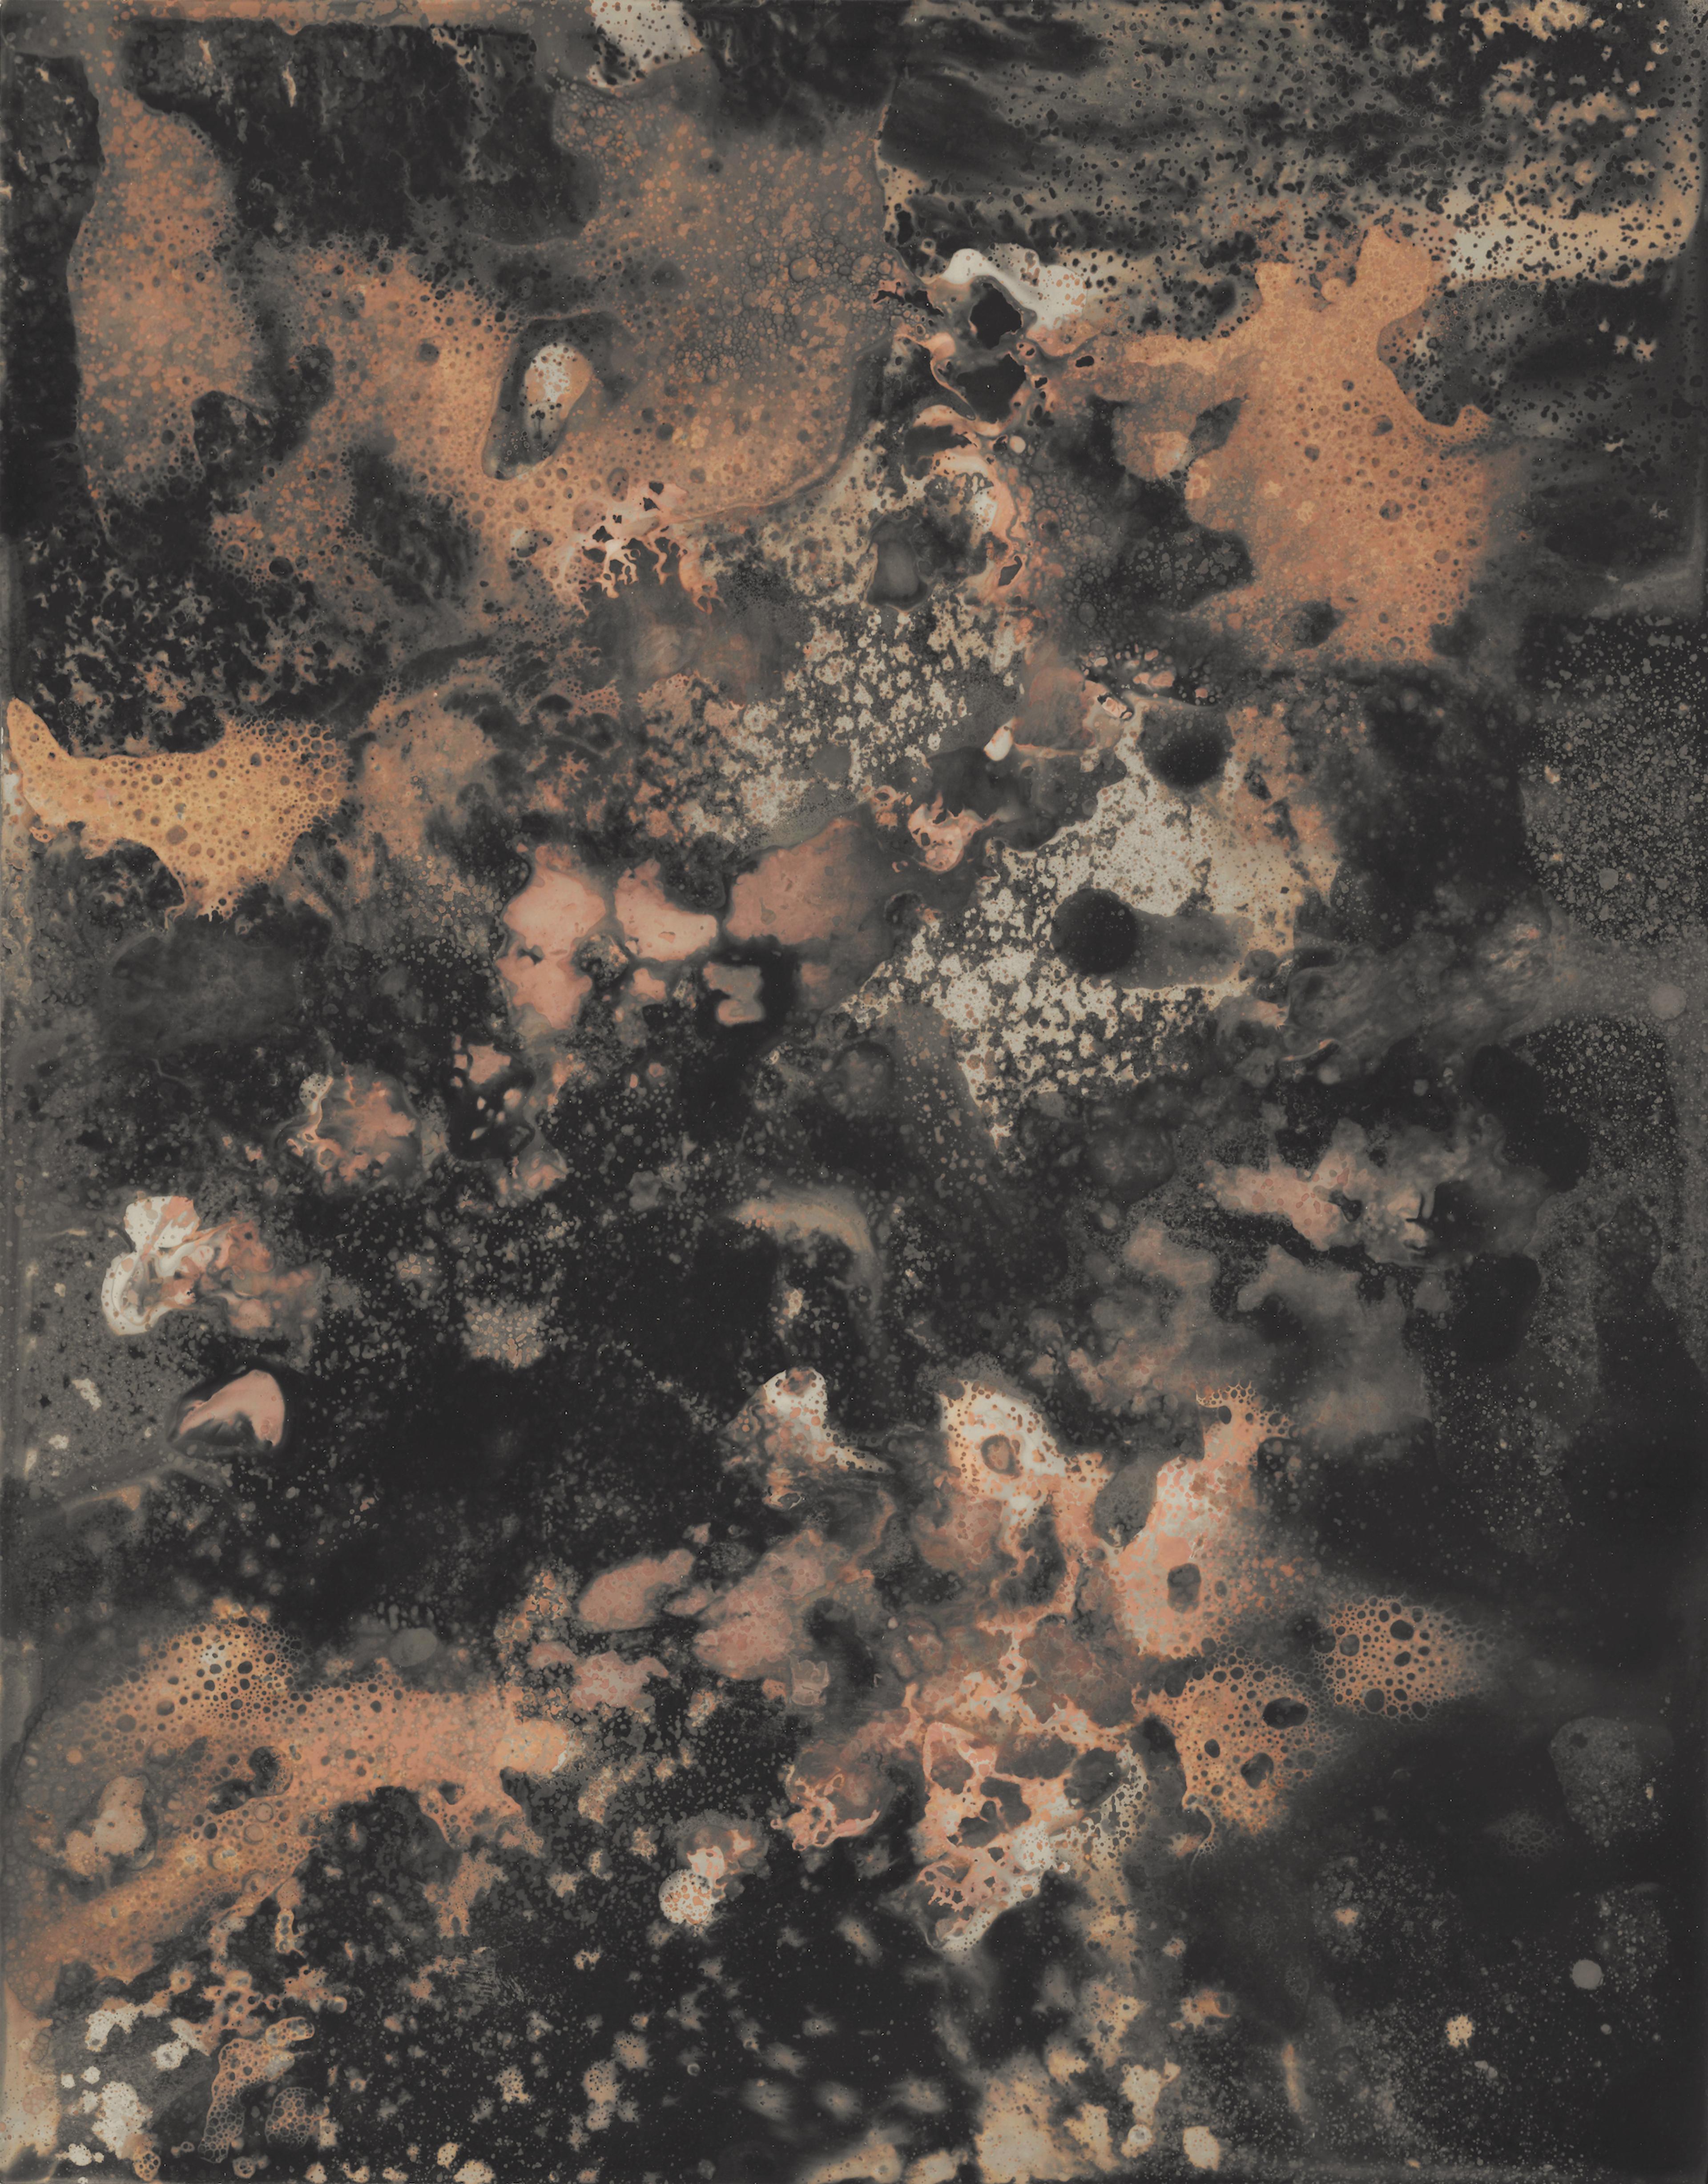 Abstract print with dark and light contrasting elements made by bubbling liquids and drips